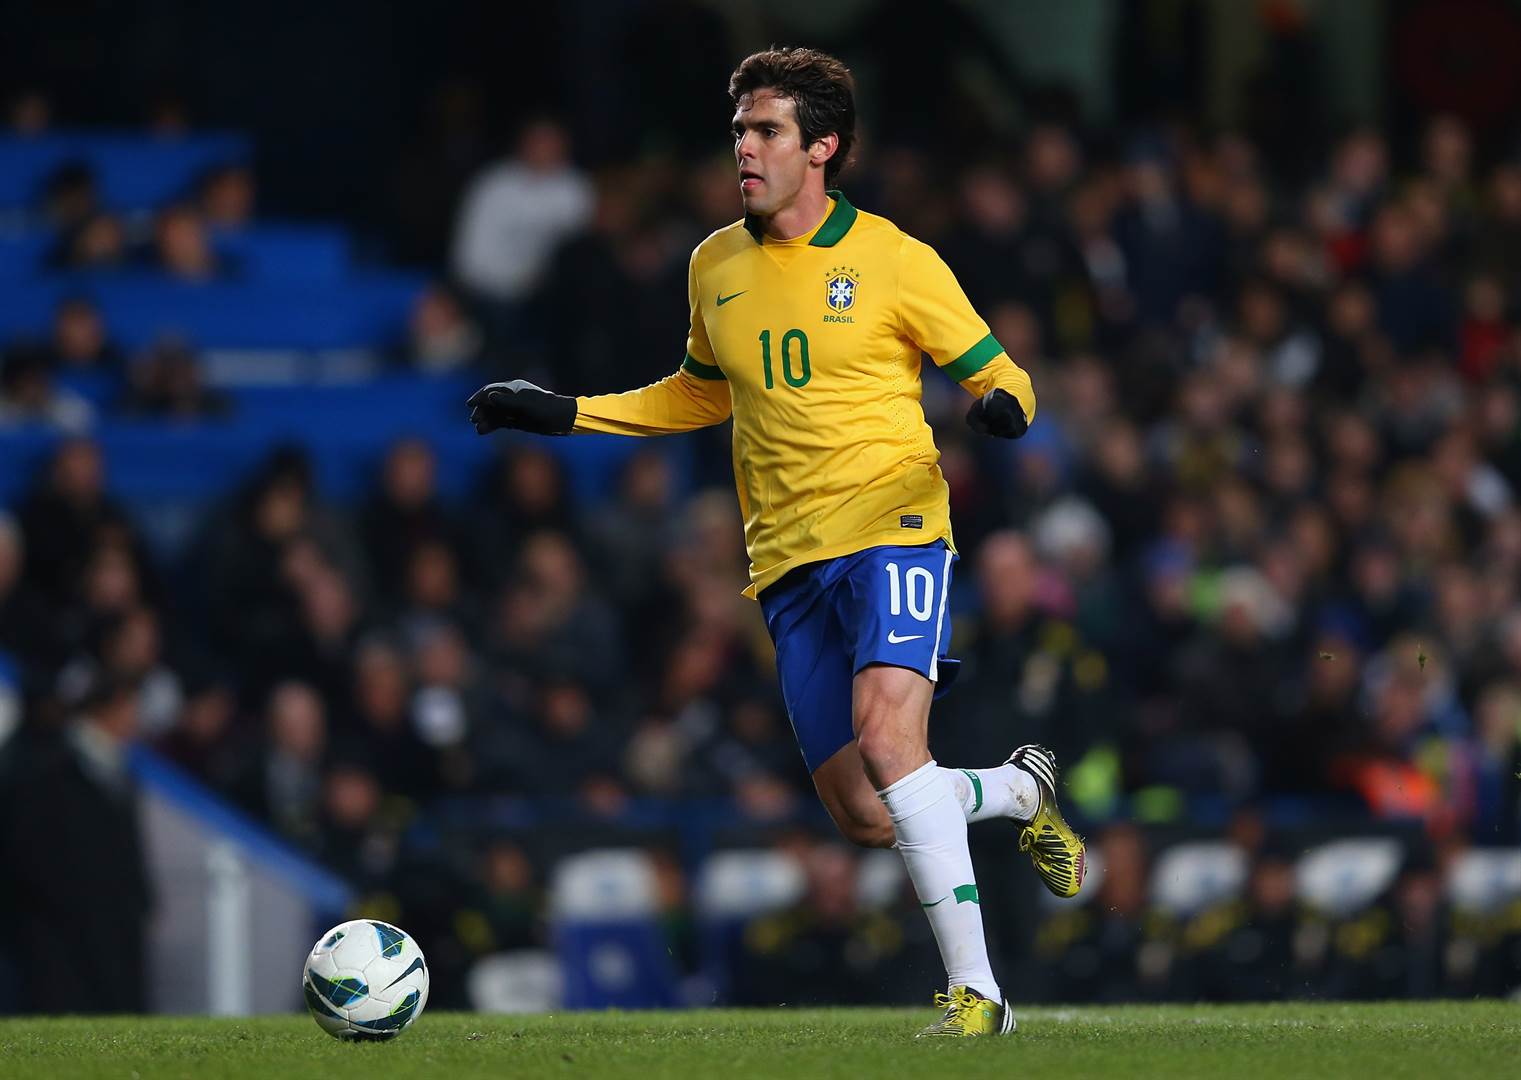 6) Kaka (Brazil's number 10 between 2009 and 2016)